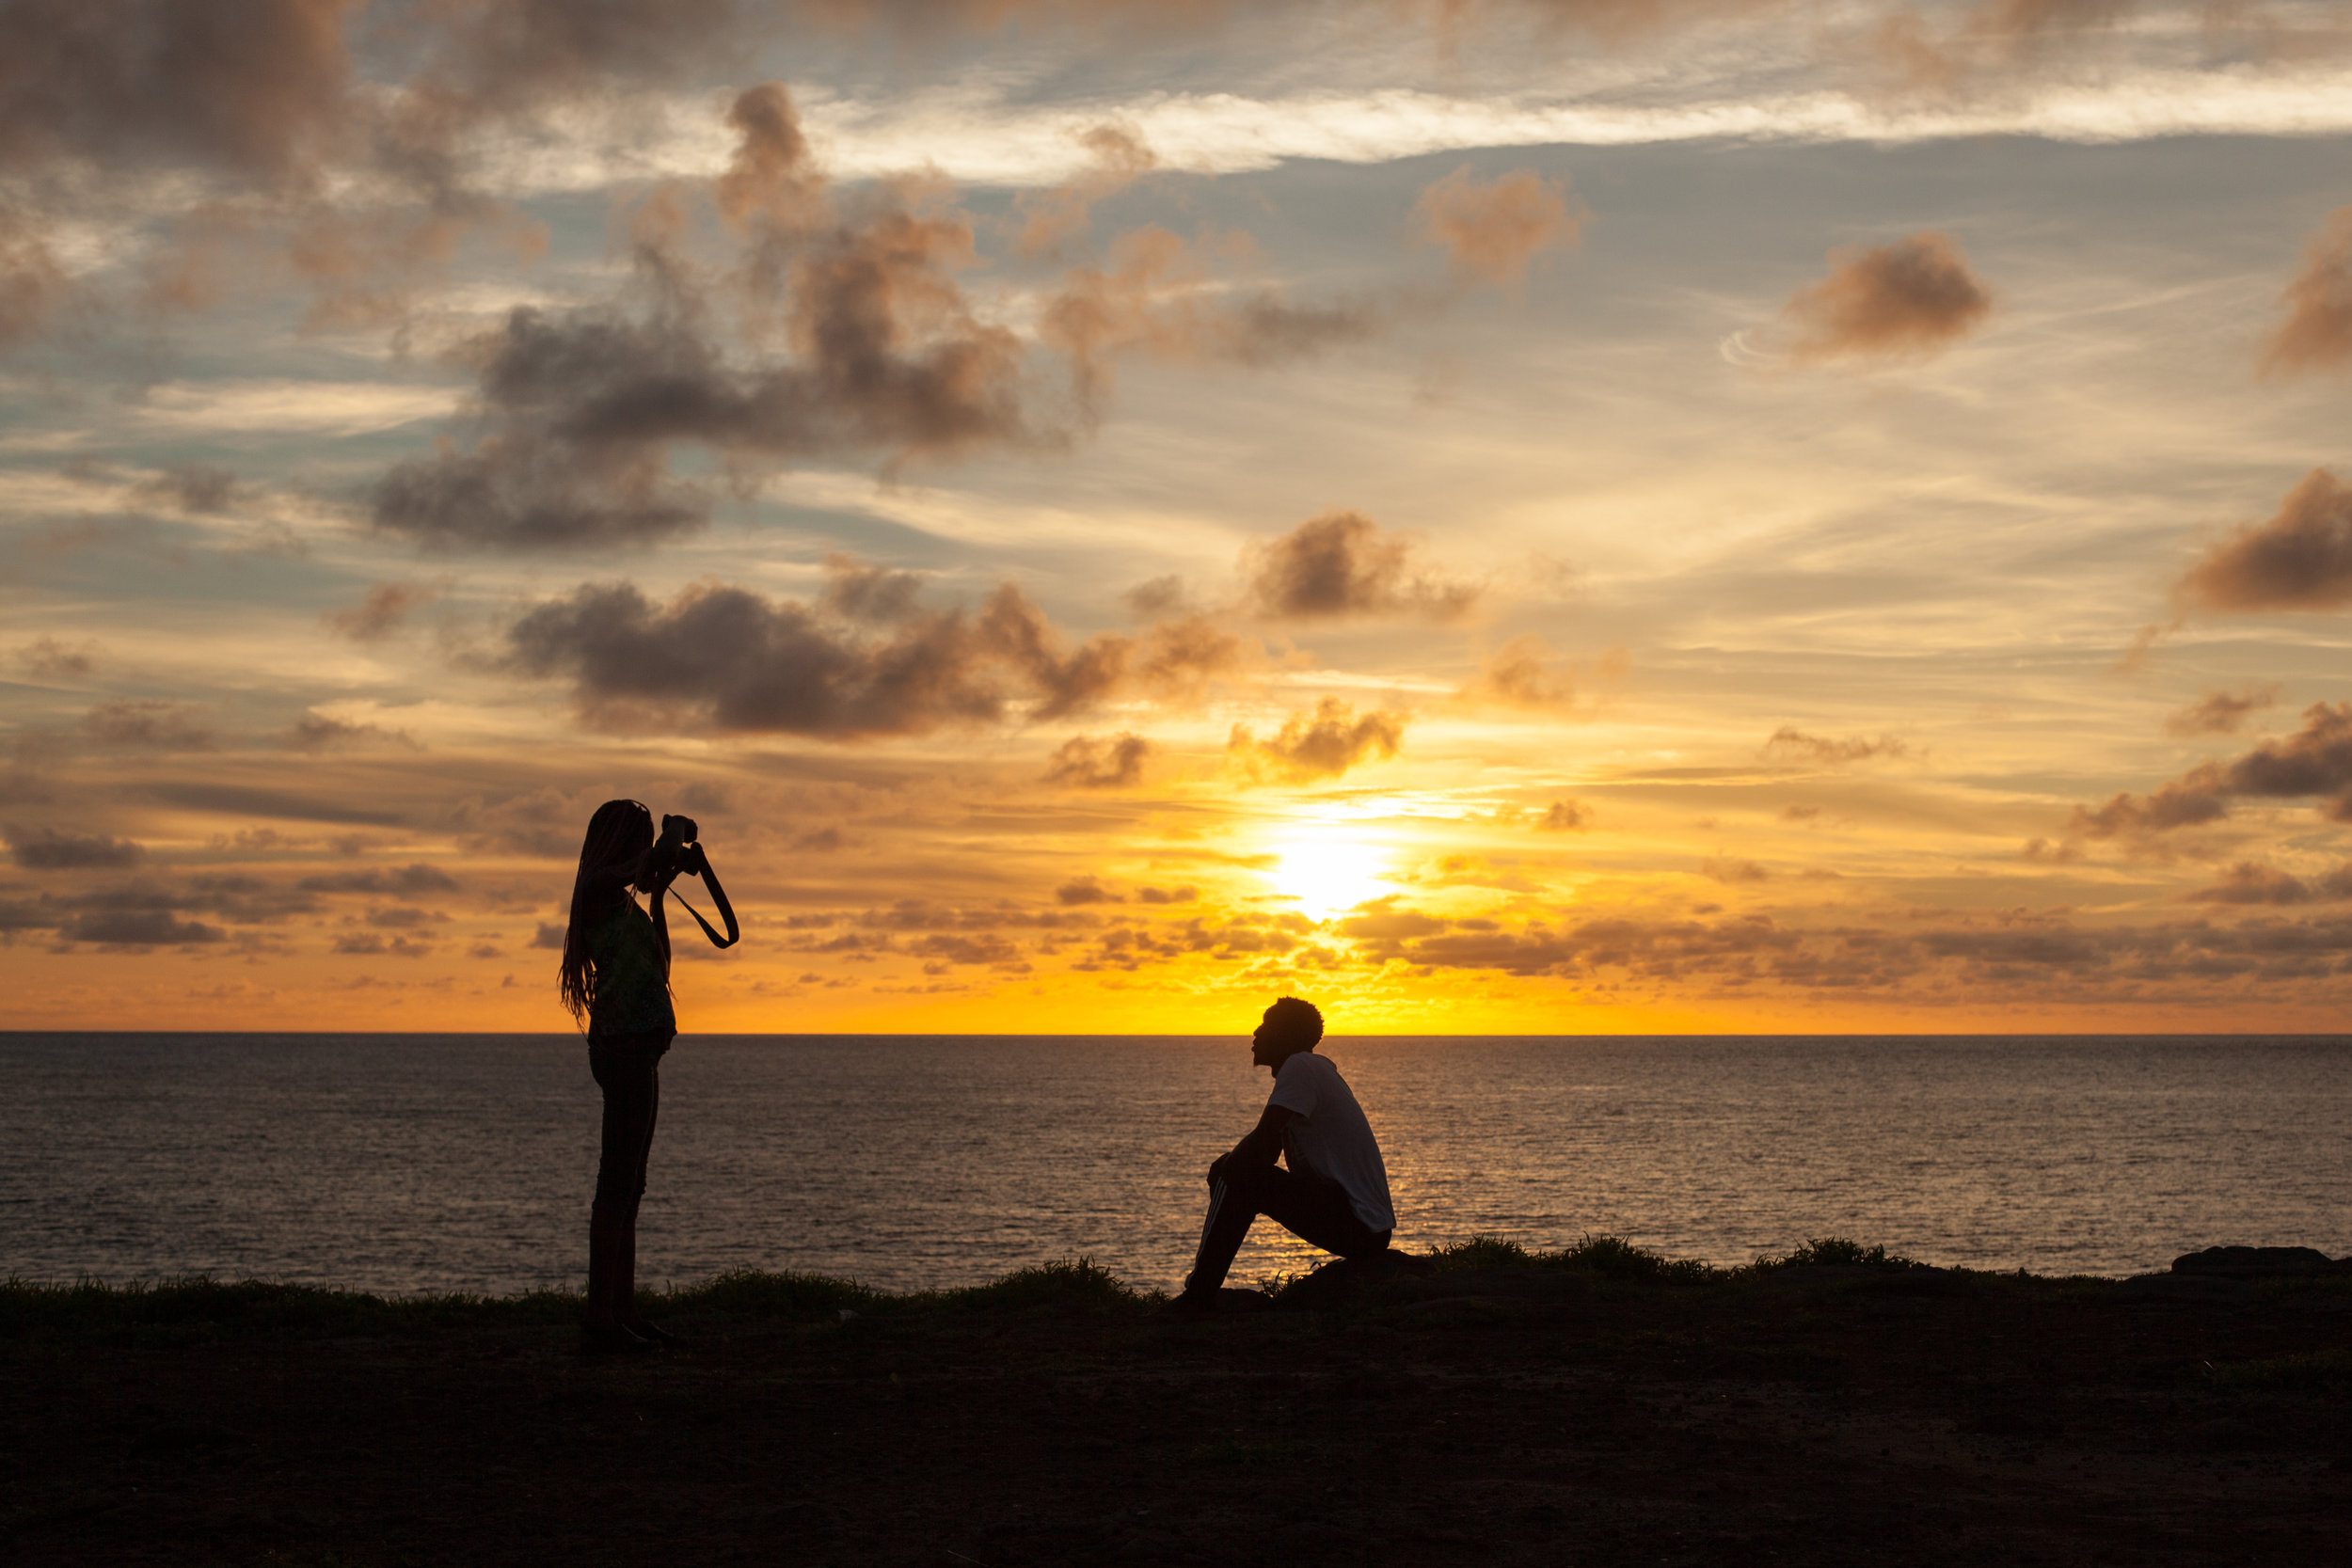 A photo shoot takes place at sunset on Ngor island in Senegal.